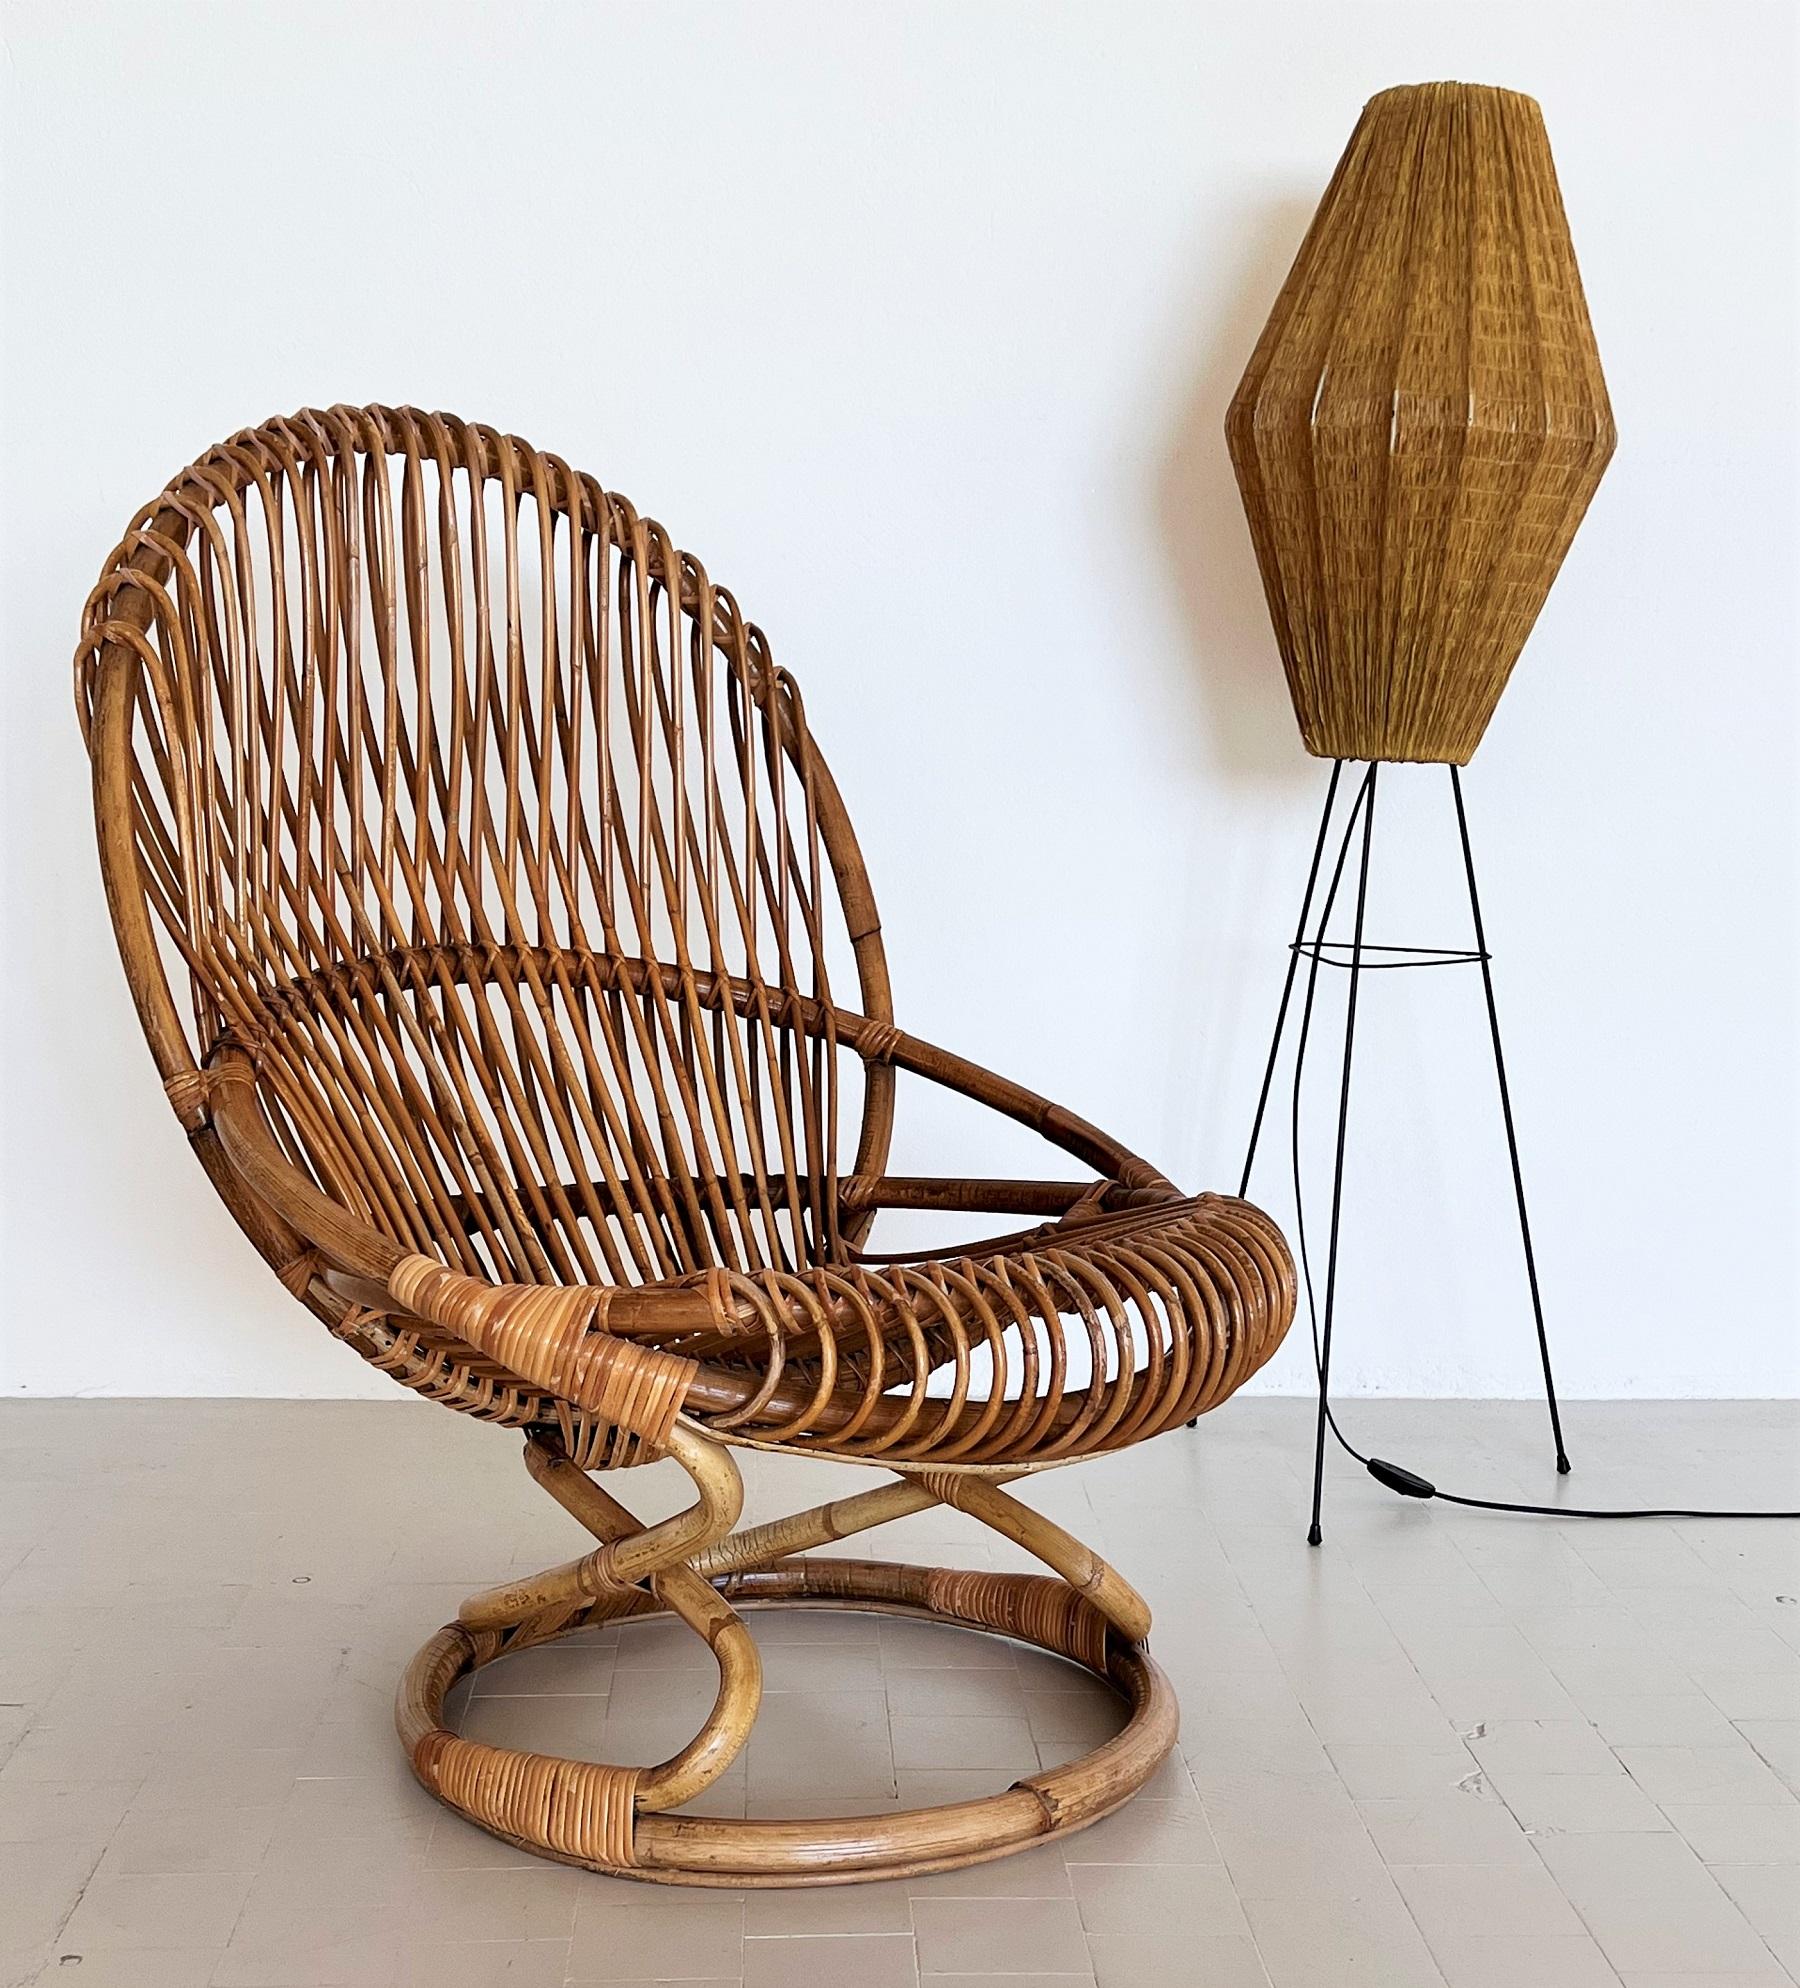 Gorgeous and rare big rattan chair designed by Giovanni Travasa for Bonacina in the 1950s.
This chair have been master handcrafted with natural rattan of high quality and has an amazing sculptural design!
The color is warm and beautiful.
It has been